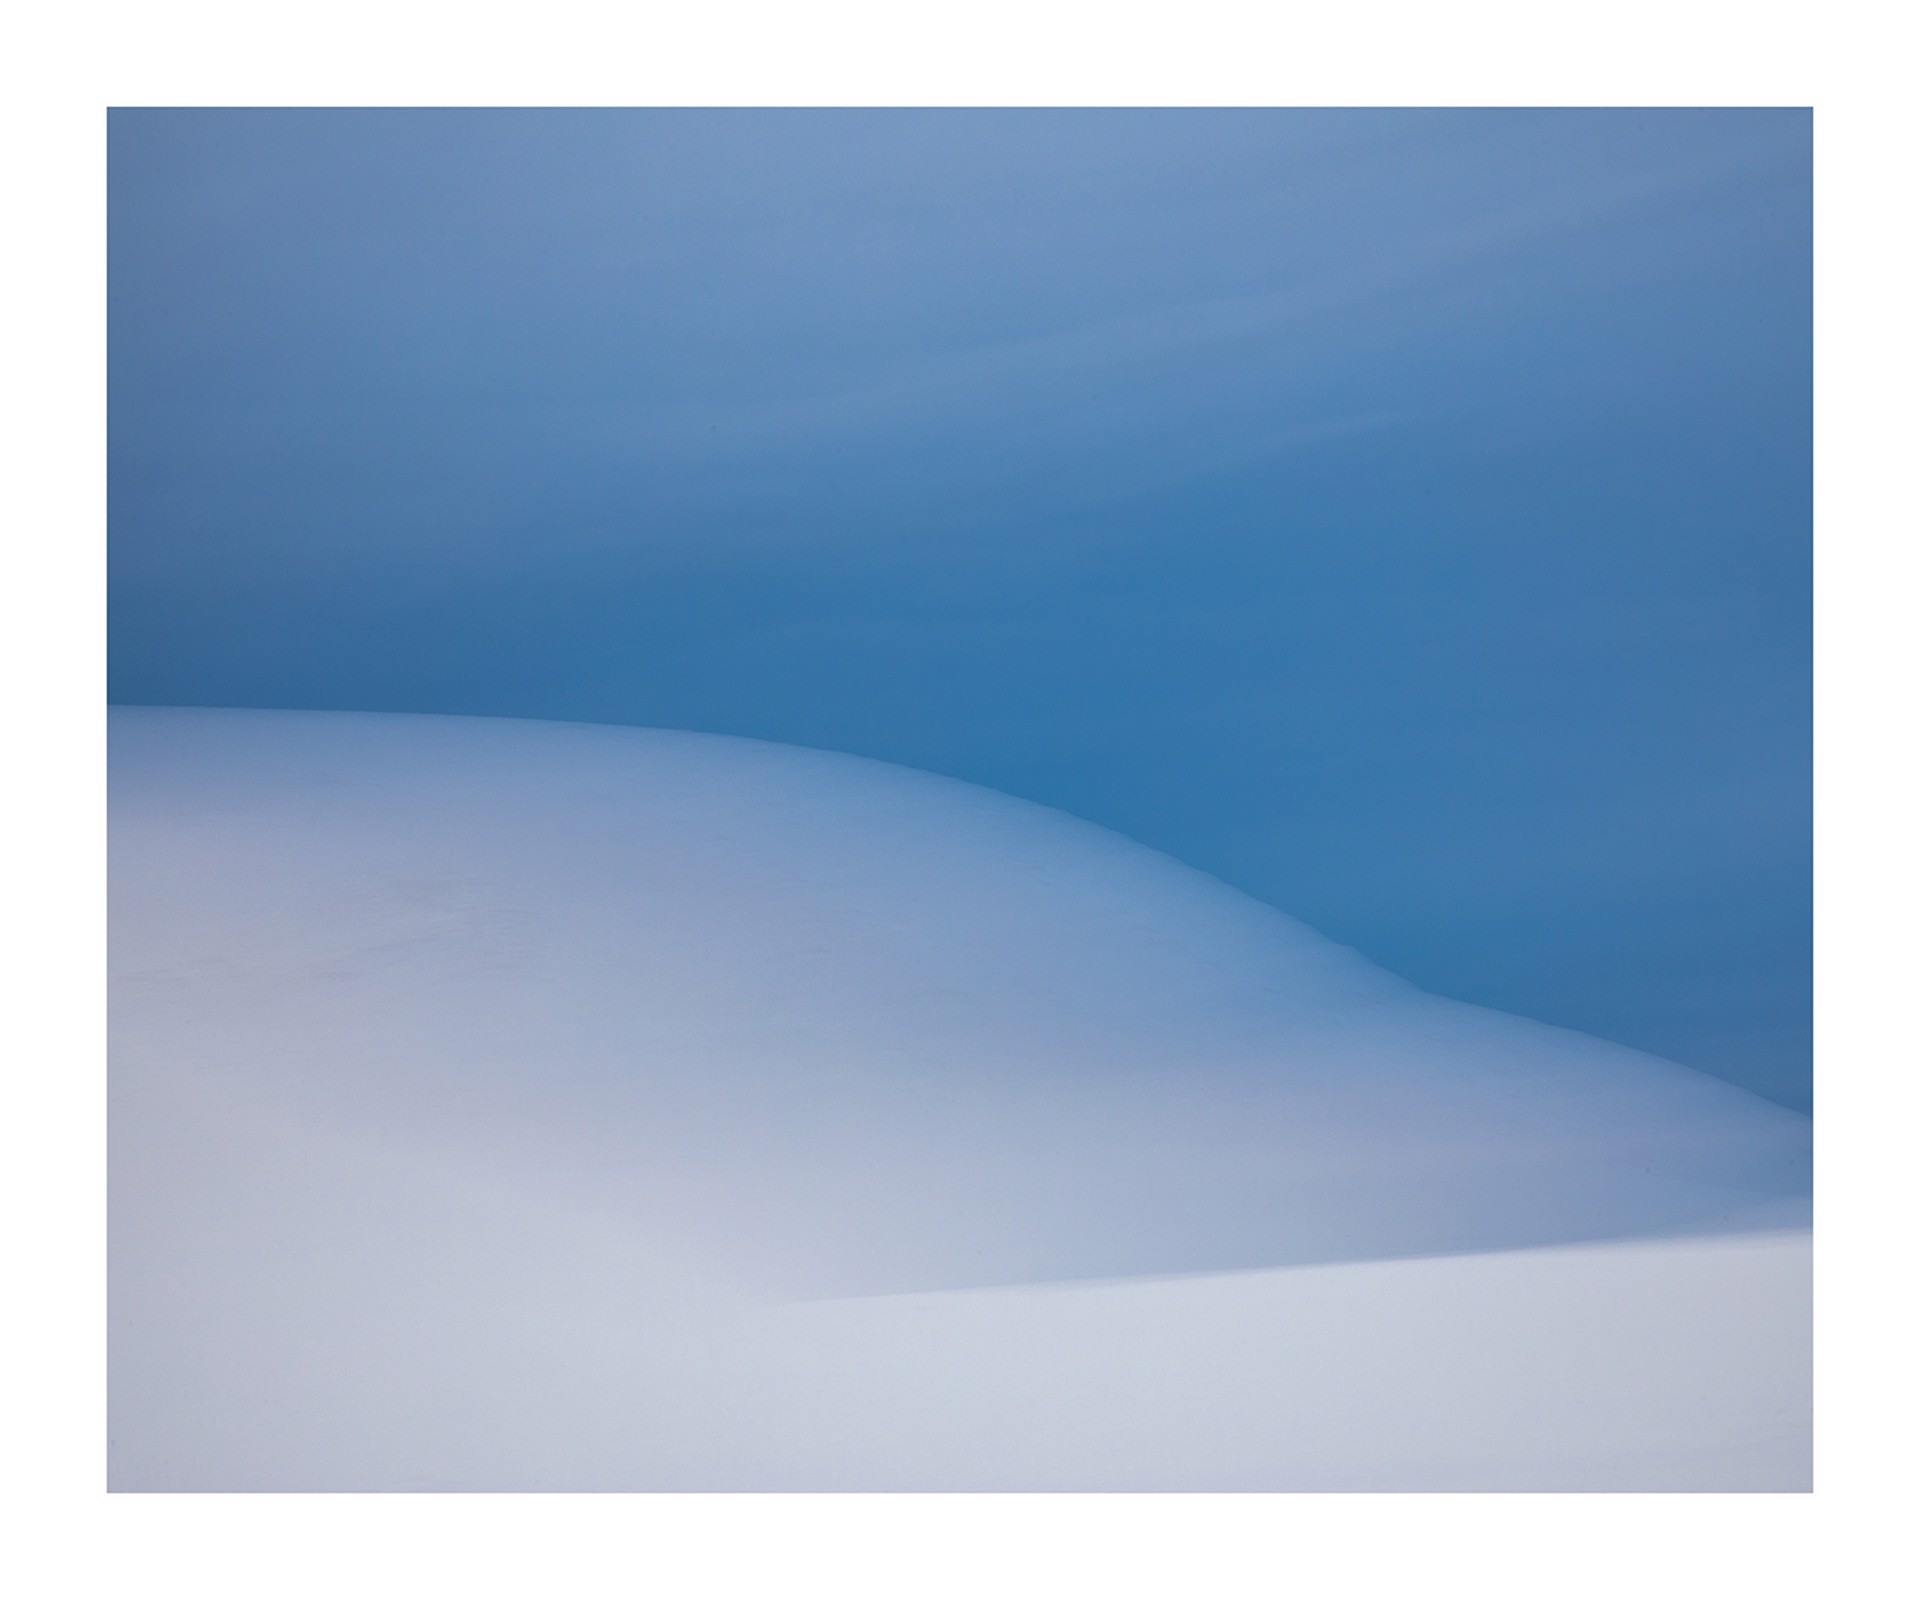 White Sands 3 by ROB LANG